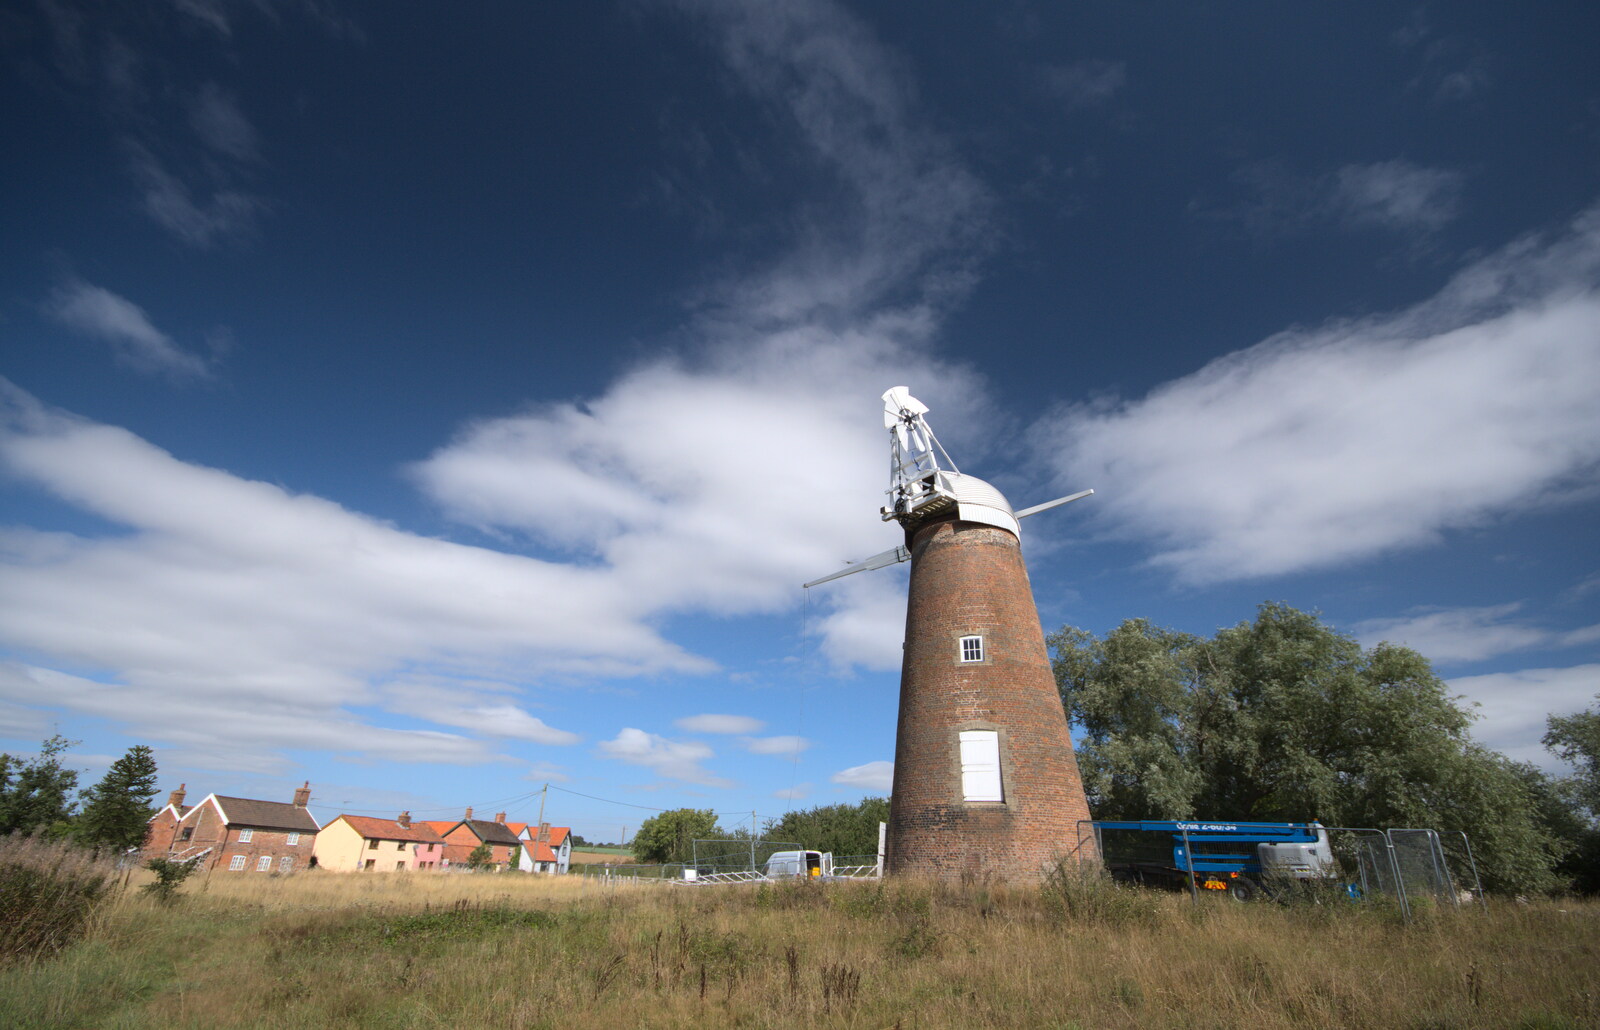 The arm is almost in place from A Sail Fitting, Billingford Windmill, Billingford, Norfolk - 20th August 2020